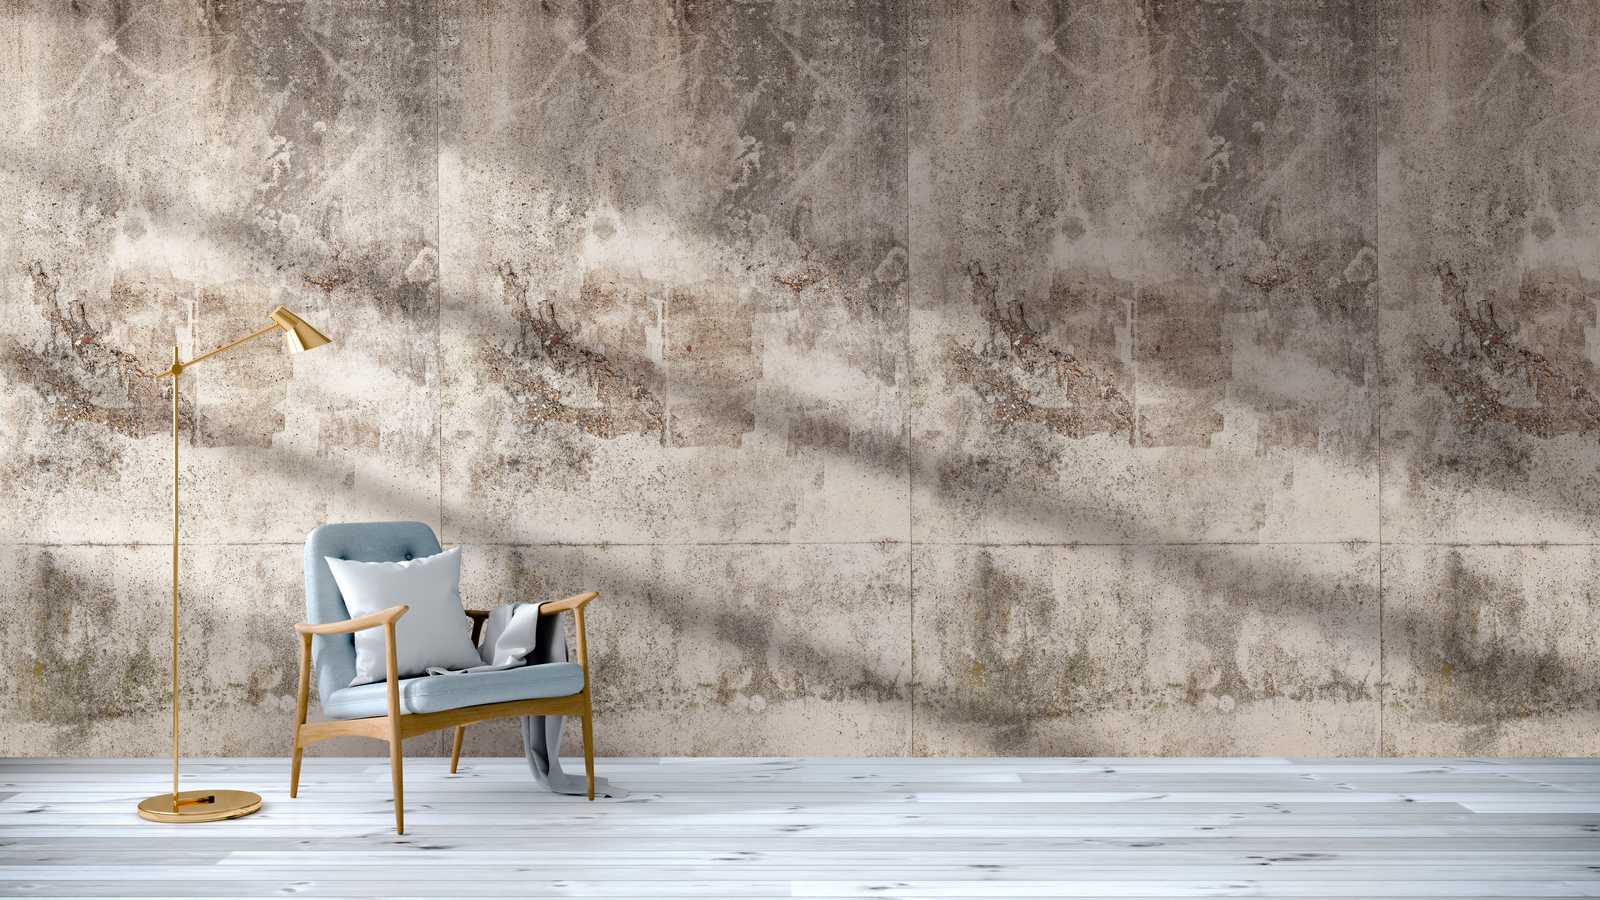             Wallpaper novelty | motif wallpaper concrete wall rustic with used look
        